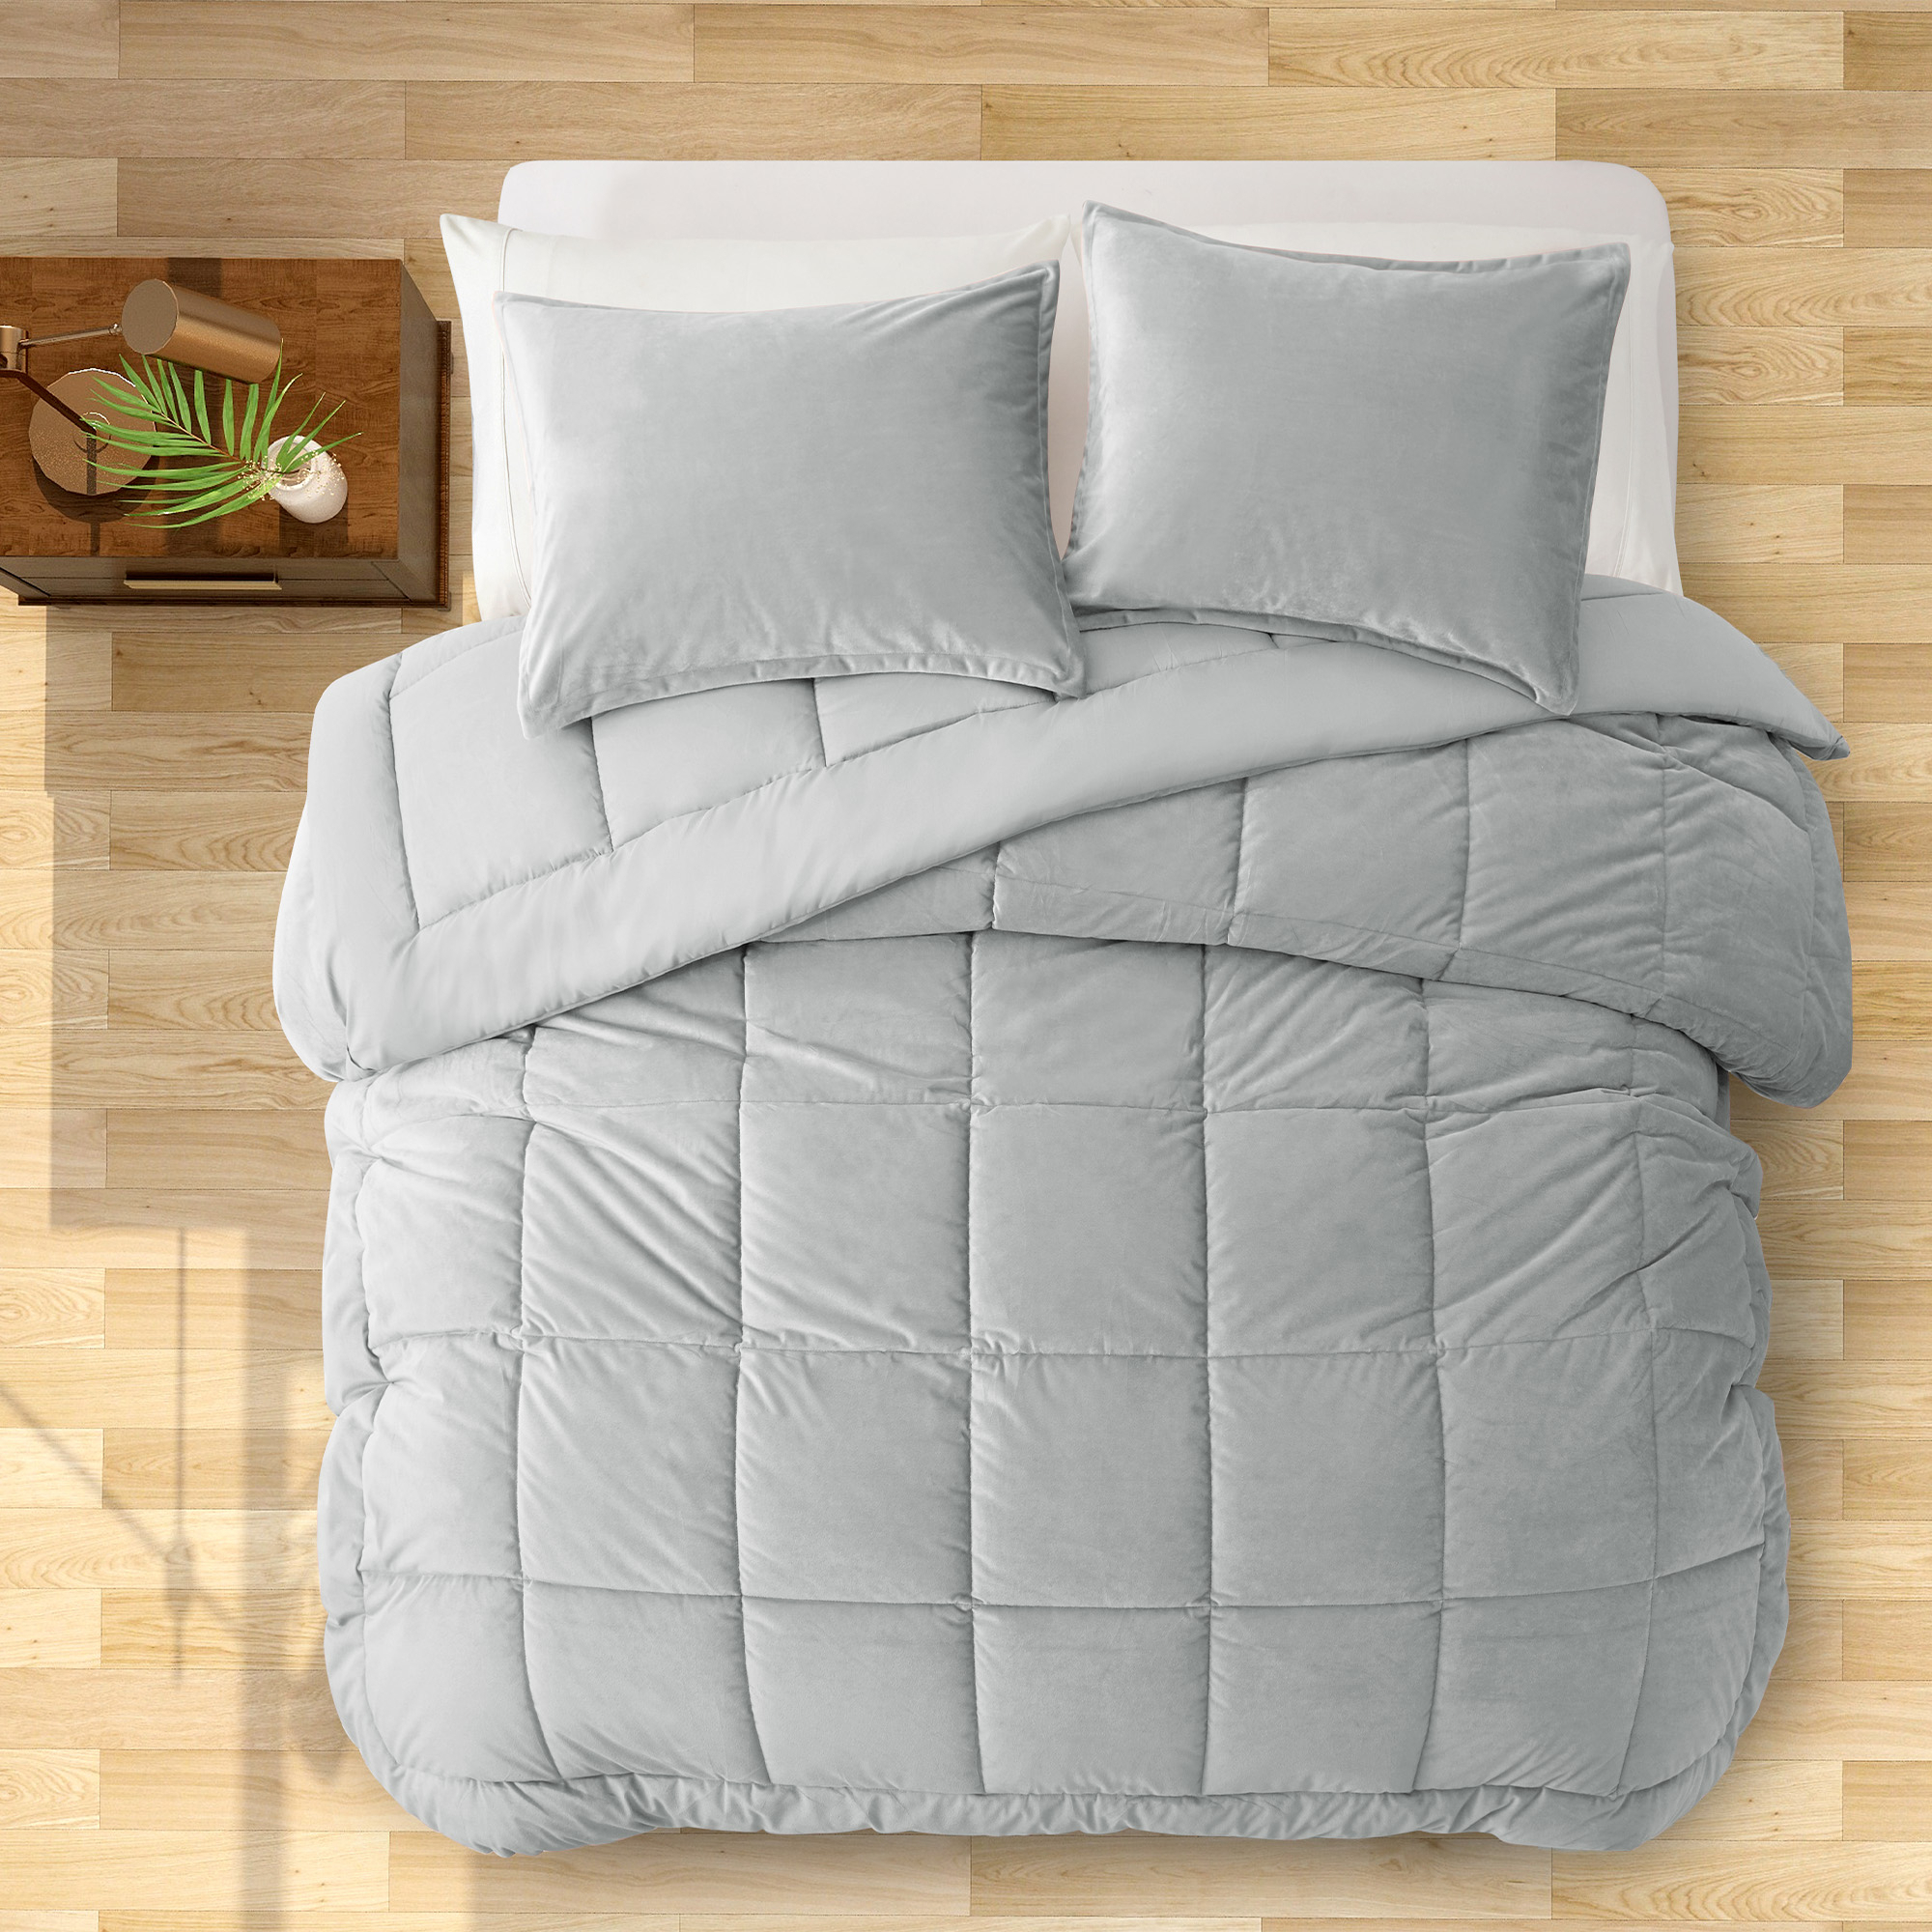 2 Or 3 Pieces Quilted Comforter All Season Down Alternative Reversible Ultra Soft Velet Duvet Insert - Full/Queen Size